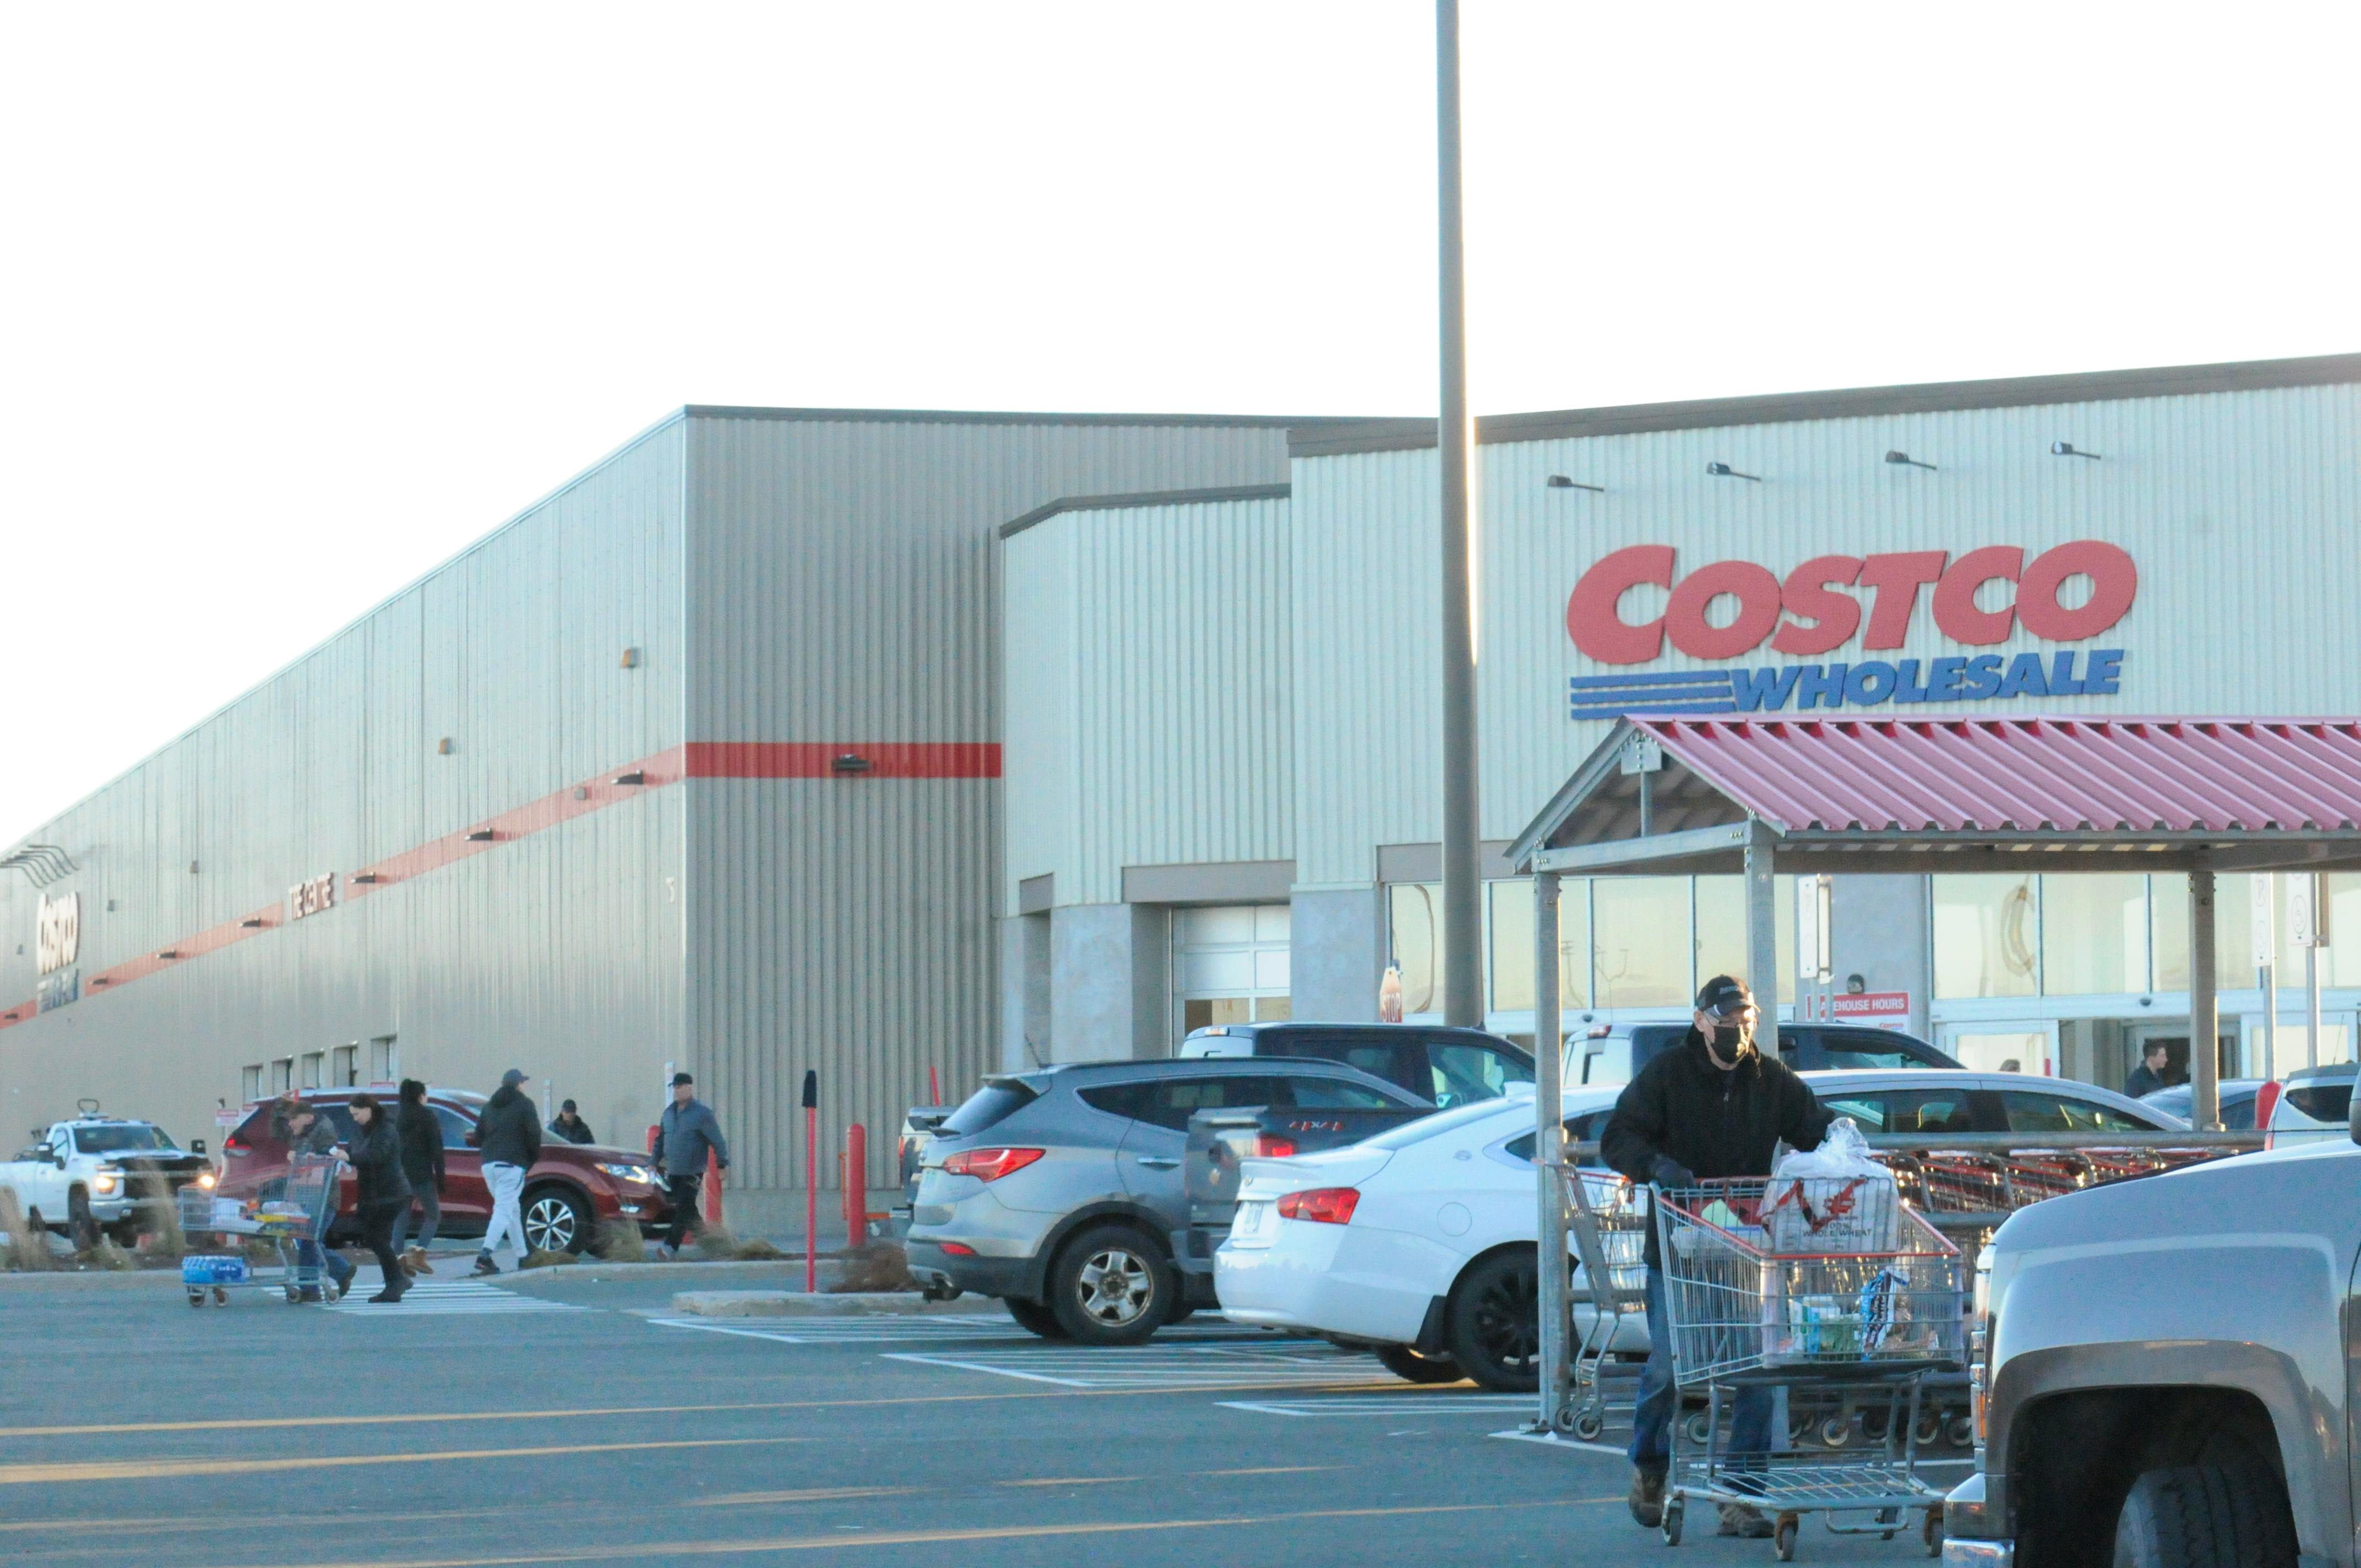 No Costco near me for many Newfoundlanders, making use of membership will  still require travel to St. John's or online shopping, hopes for jobs  dwindling